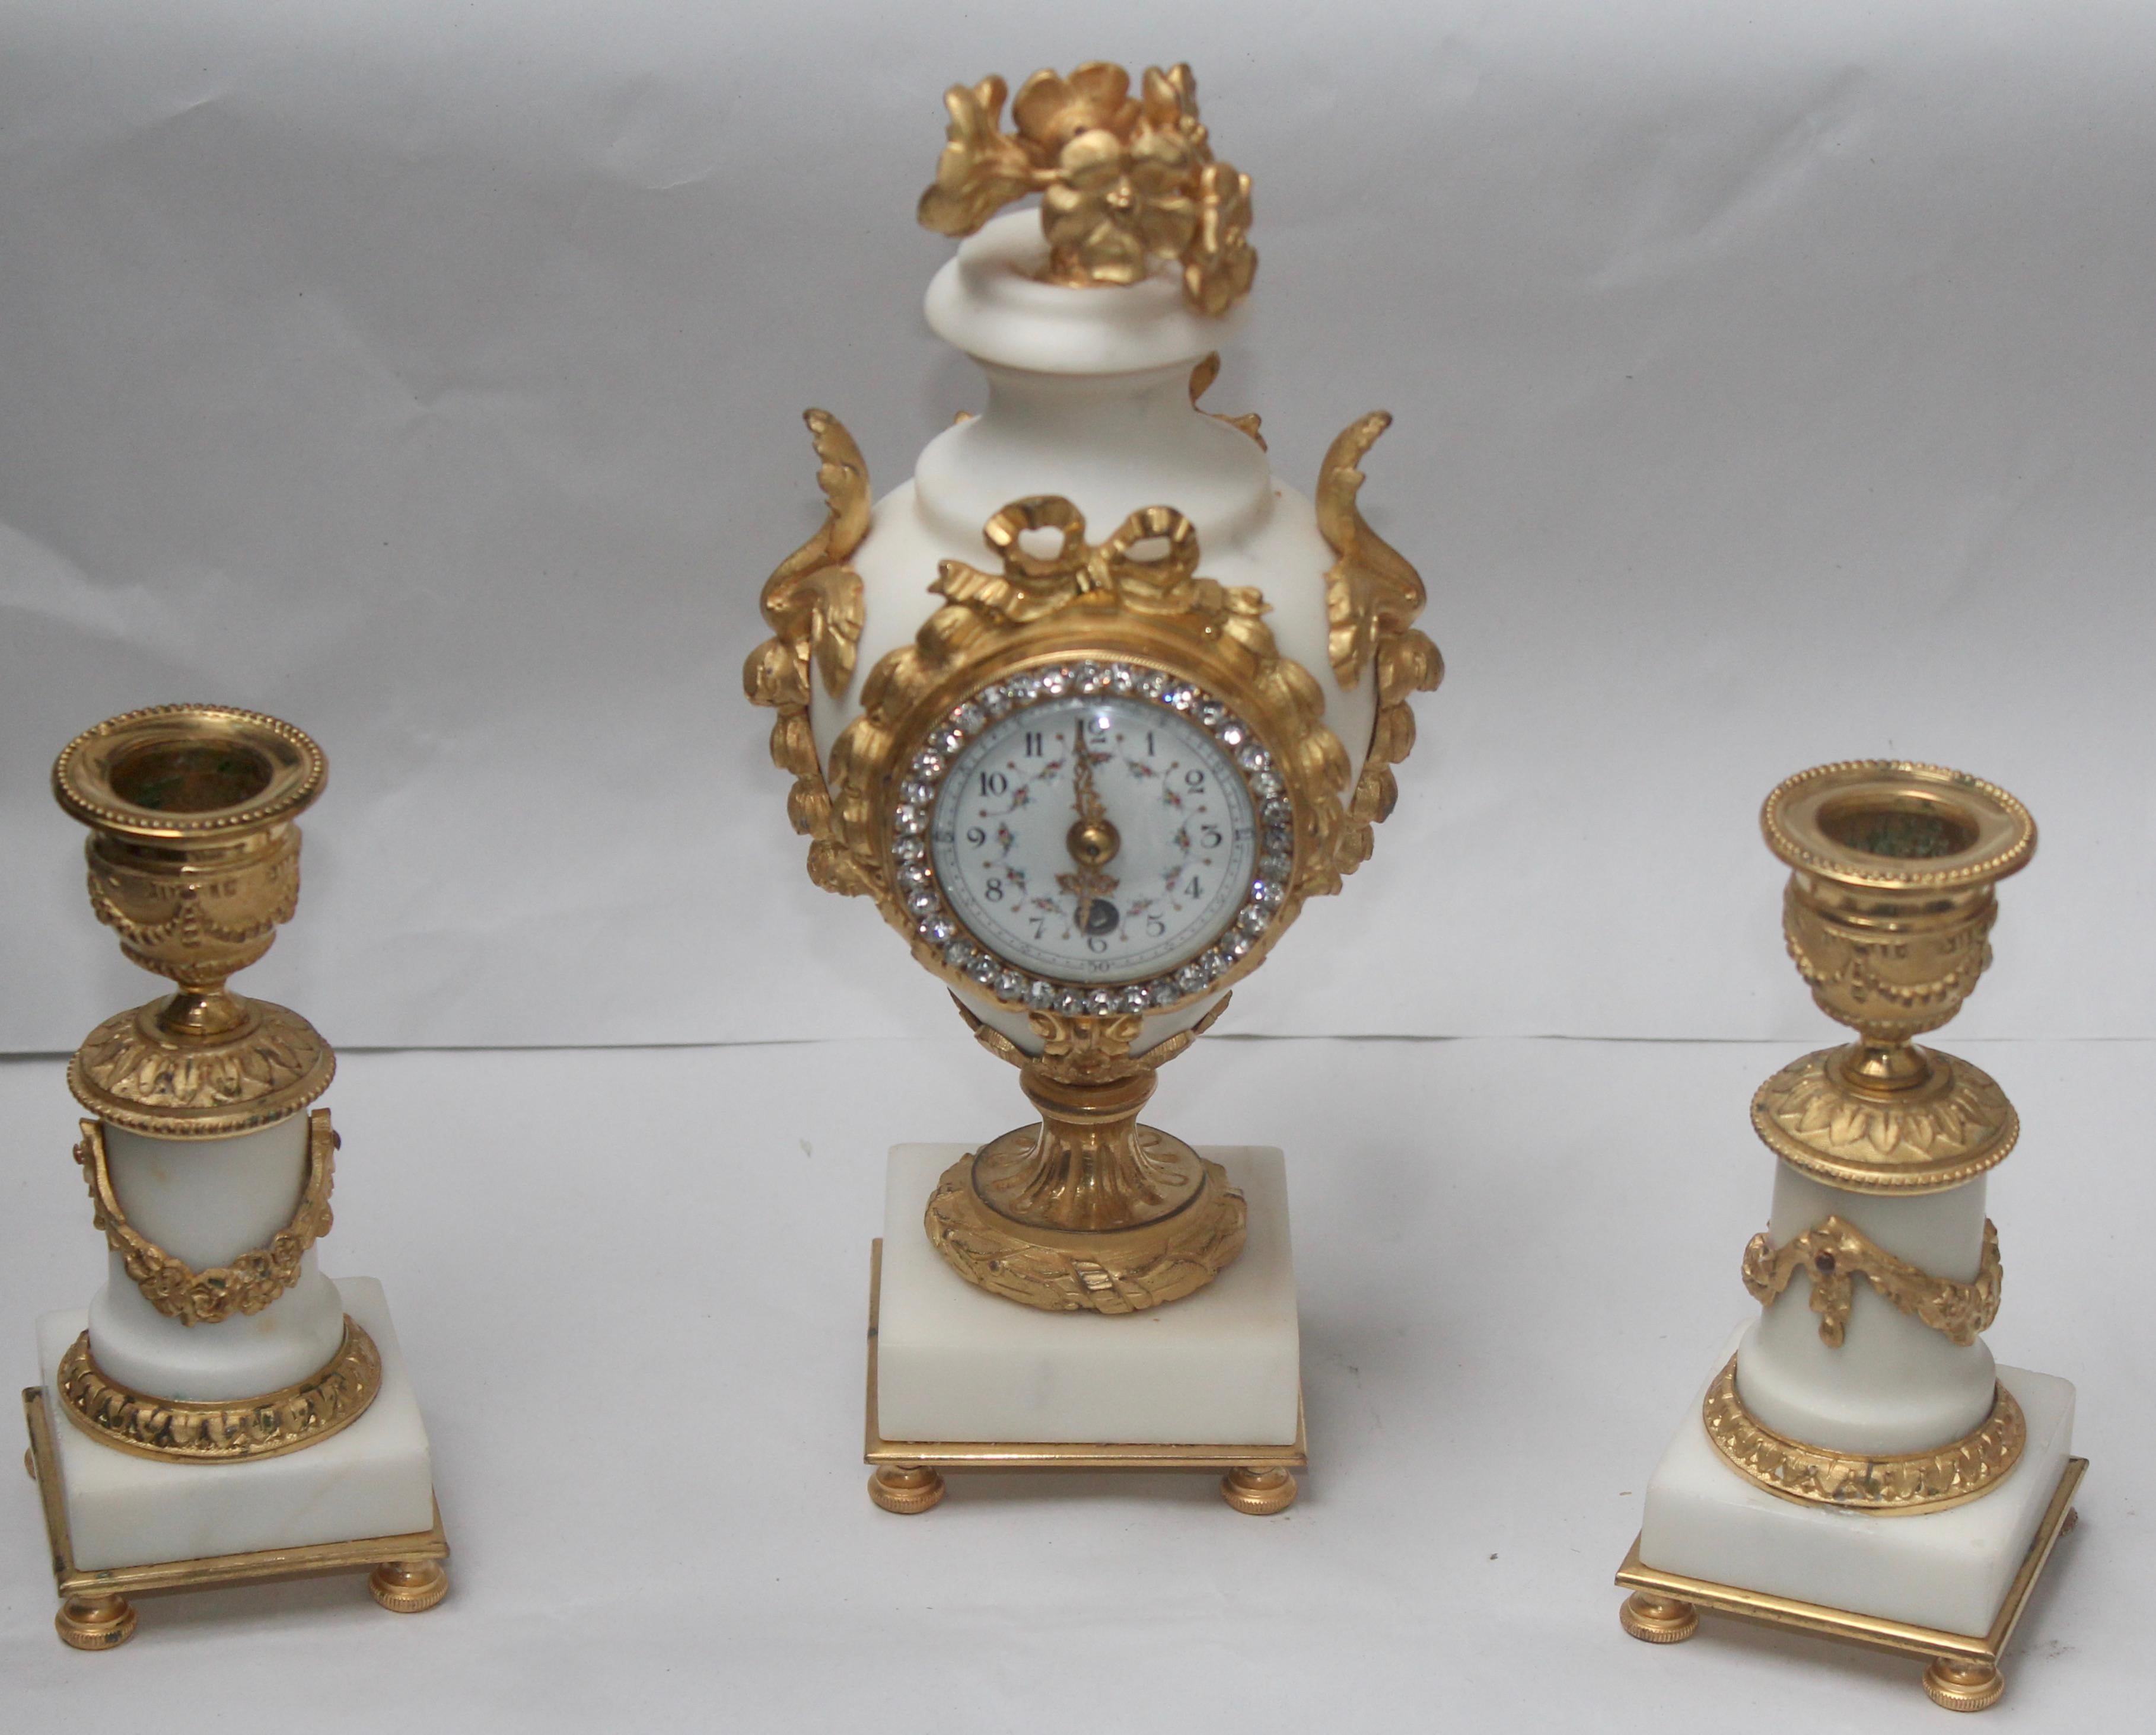 An Exquisive 19th century French ormolu and white marble three-piece Clock Garniture
The central clock is shaped from white marble as a vase, holding gilt bronze flowers and mounted all over with leaves and swags, the dial in polychromed porcelain